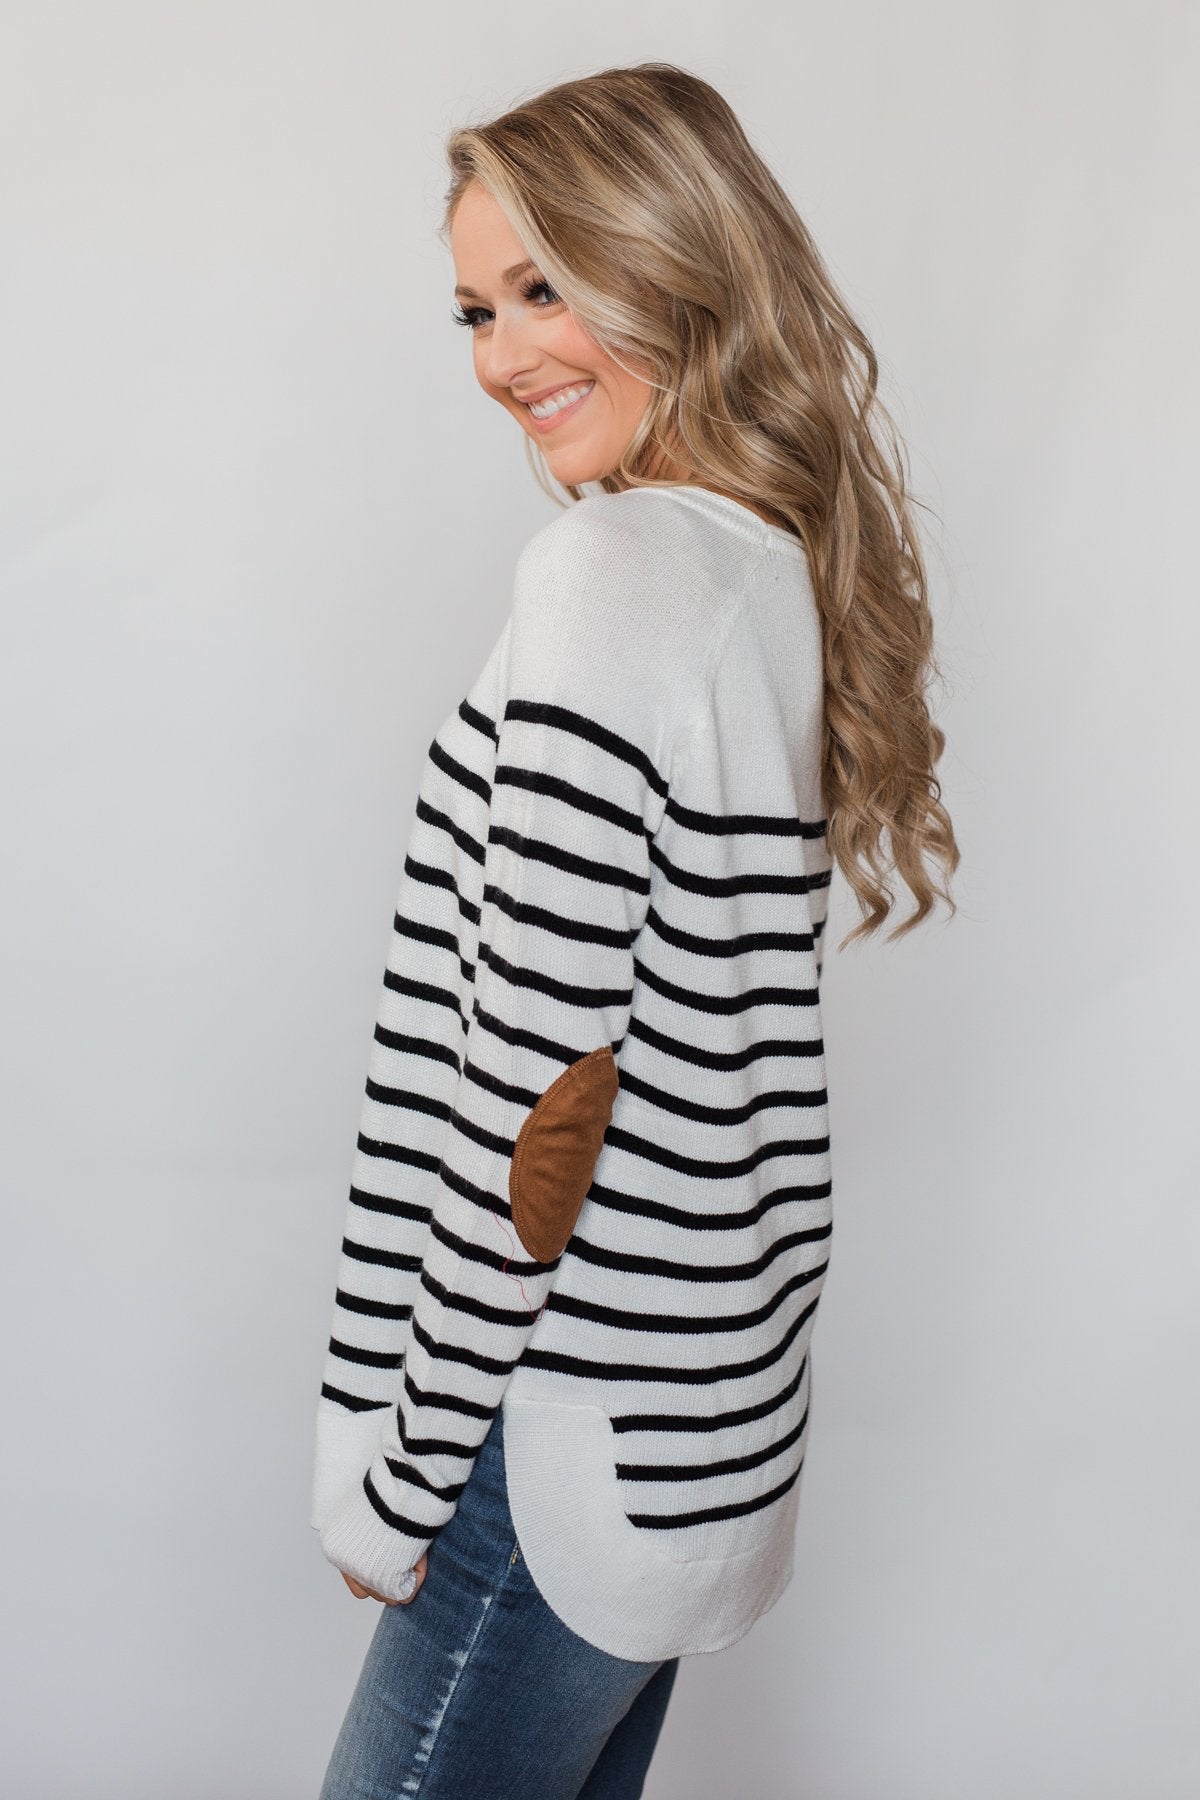 Cozy in Stripes Elbow Patch Sweater - Black & White – The Pulse Boutique